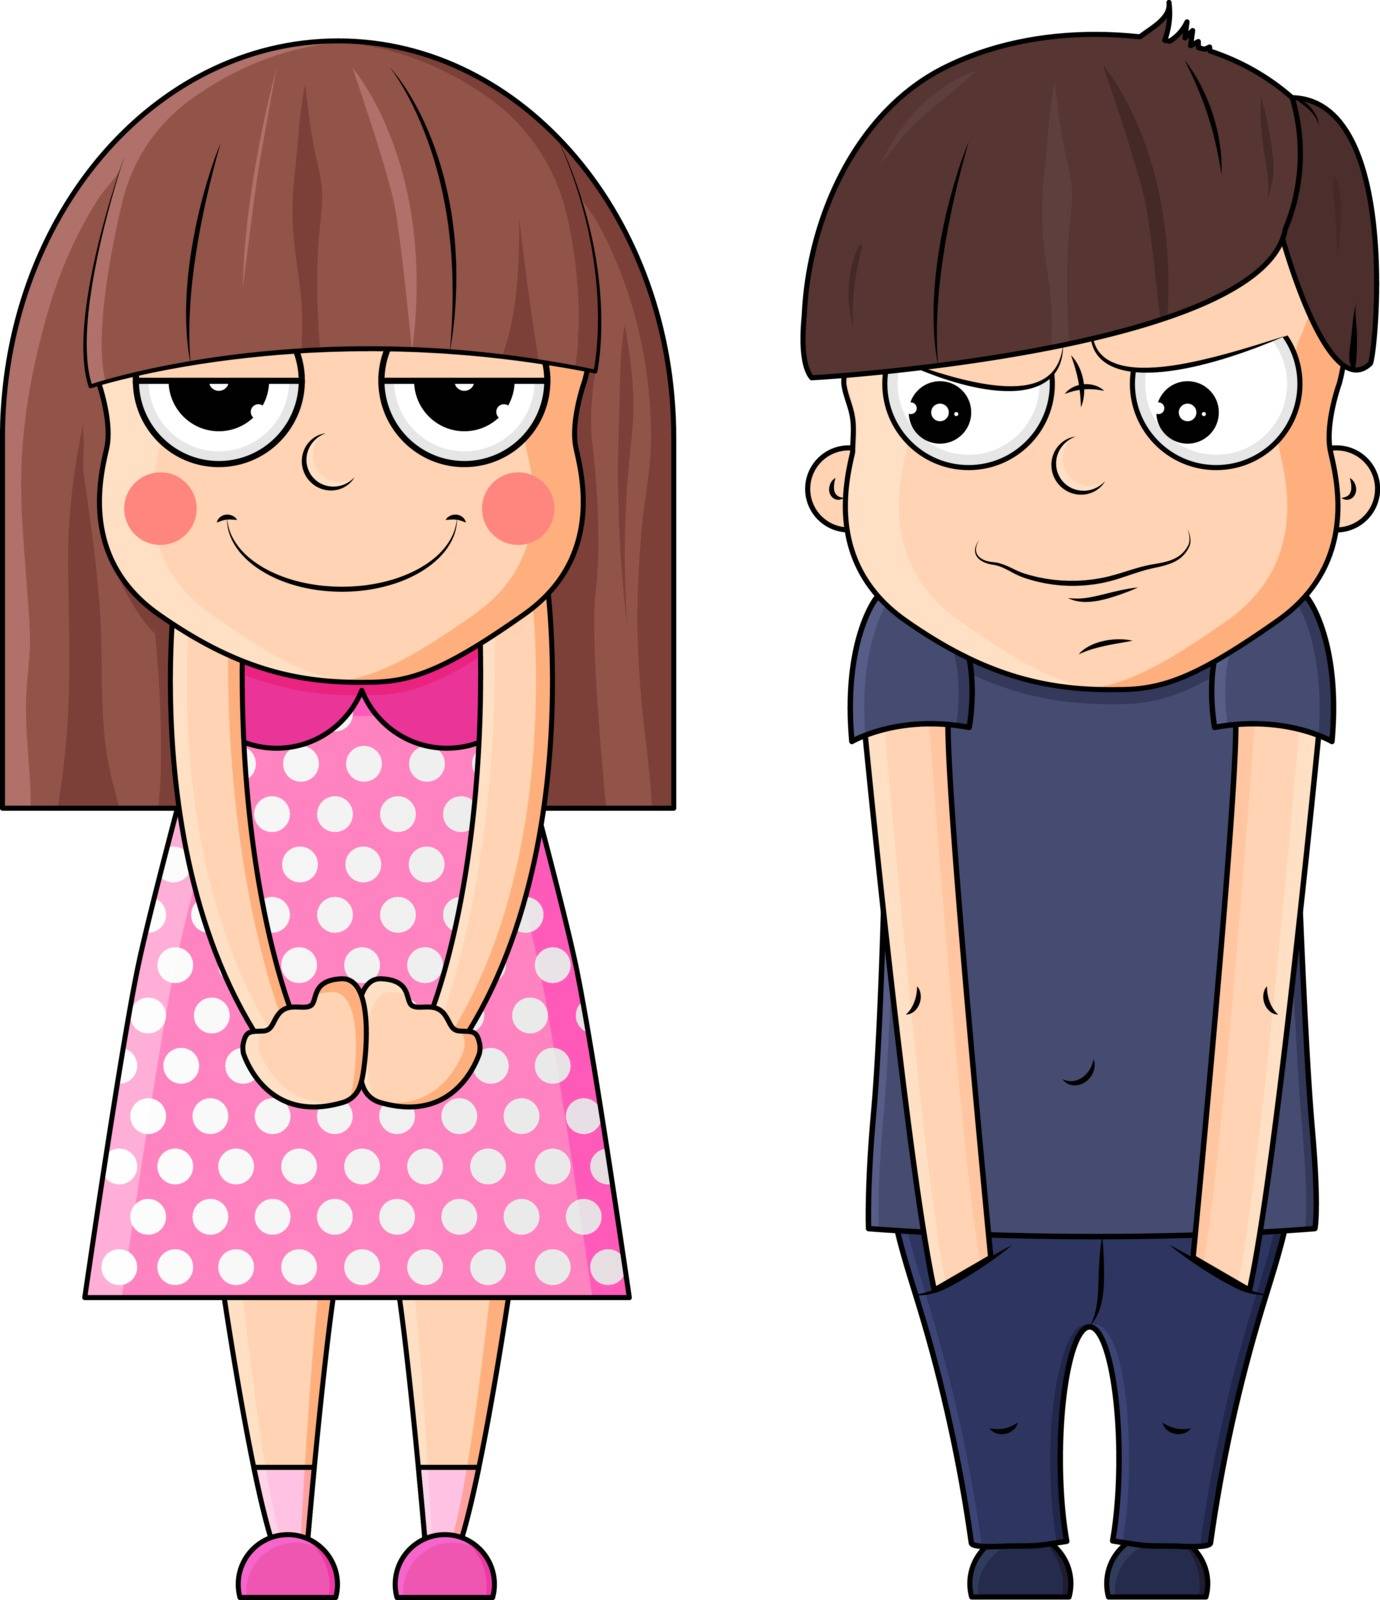 Cute cartoon boy and girl with smug expressions. Vector illustration by Lenkapenka